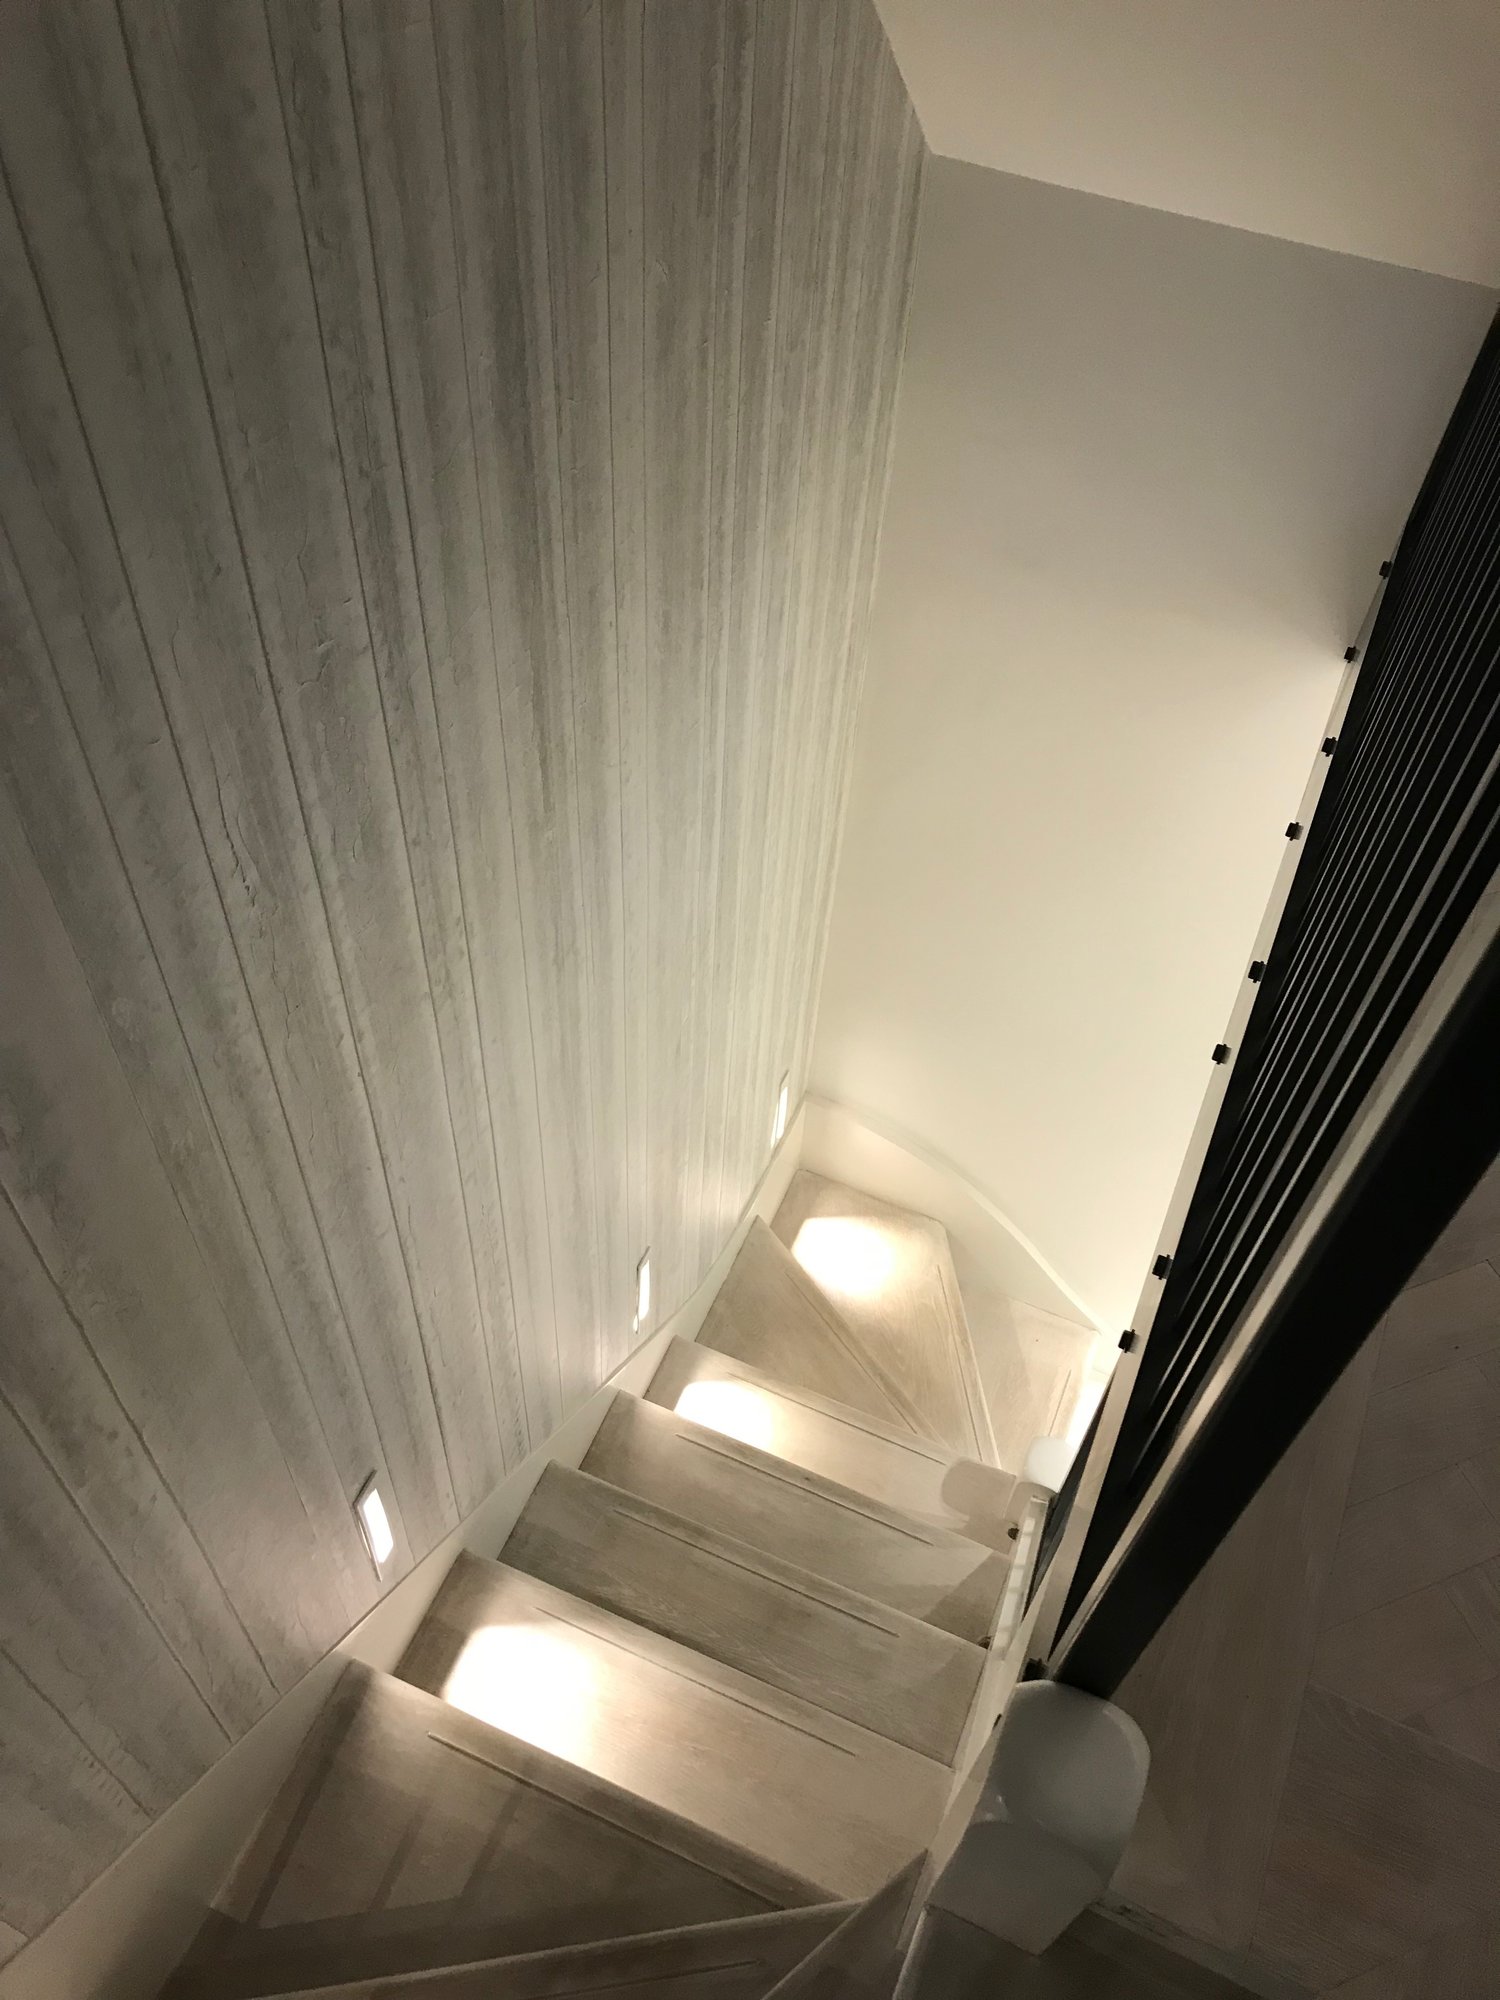 Staircase with LED spotlights on the stairs